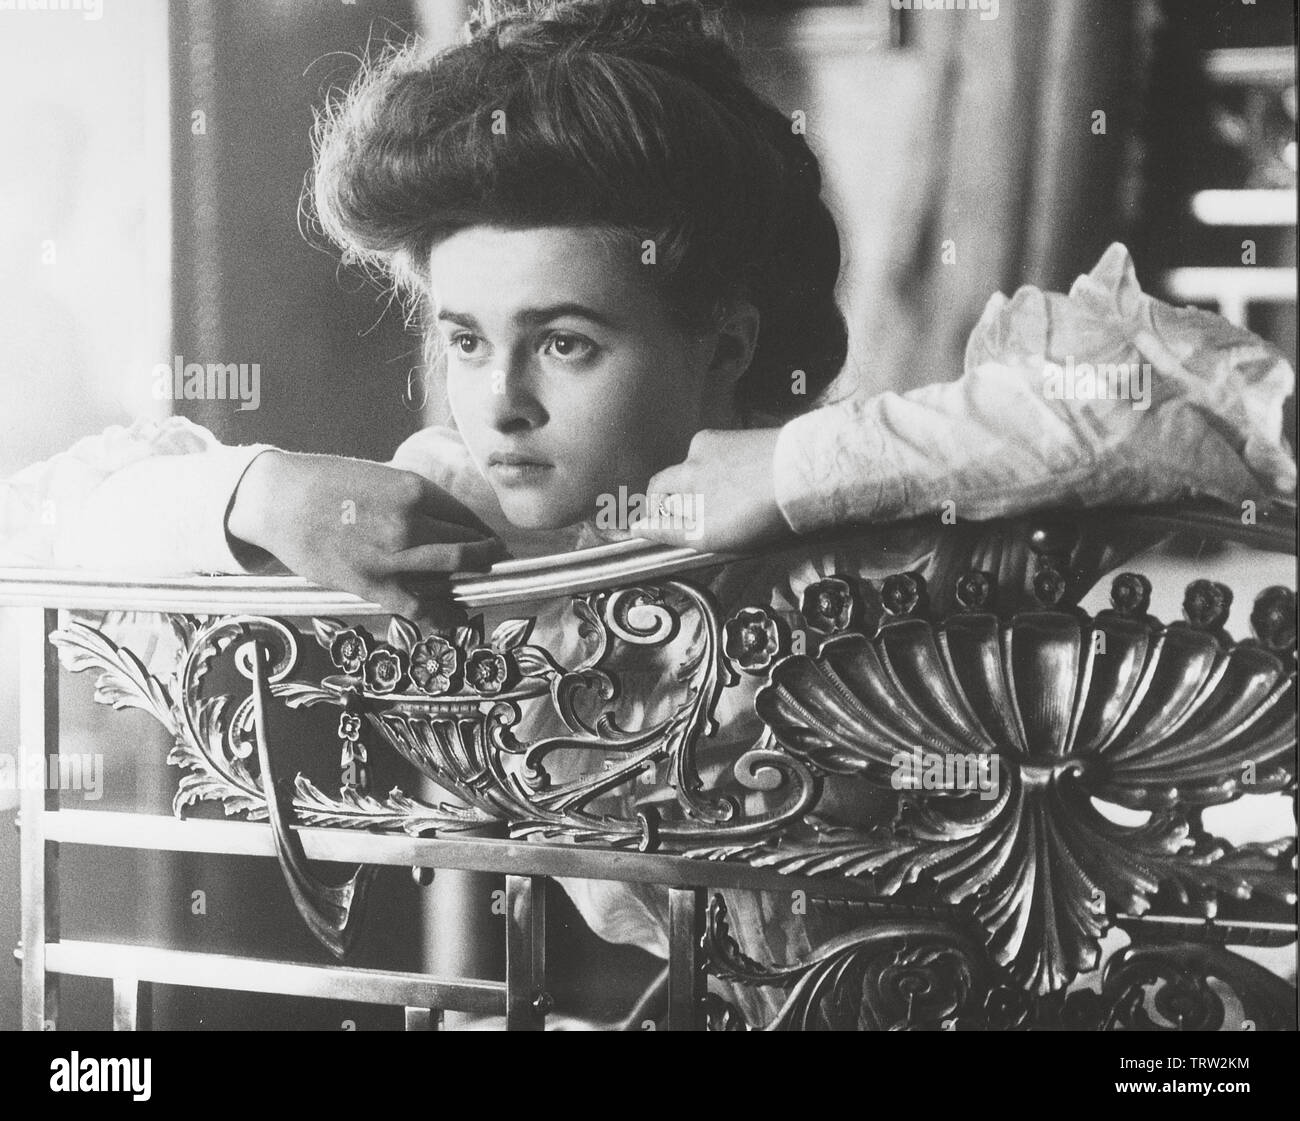 HELENA BONHAM CARTER in A ROOM WITH A VIEW (1985). Copyright: Editorial use only. No merchandising or book covers. This is a publicly distributed handout. Access rights only, no license of copyright provided. Only to be reproduced in conjunction with promotion of this film. Credit: MERCHANT IVORY/GOLDCREST / Album Stock Photo